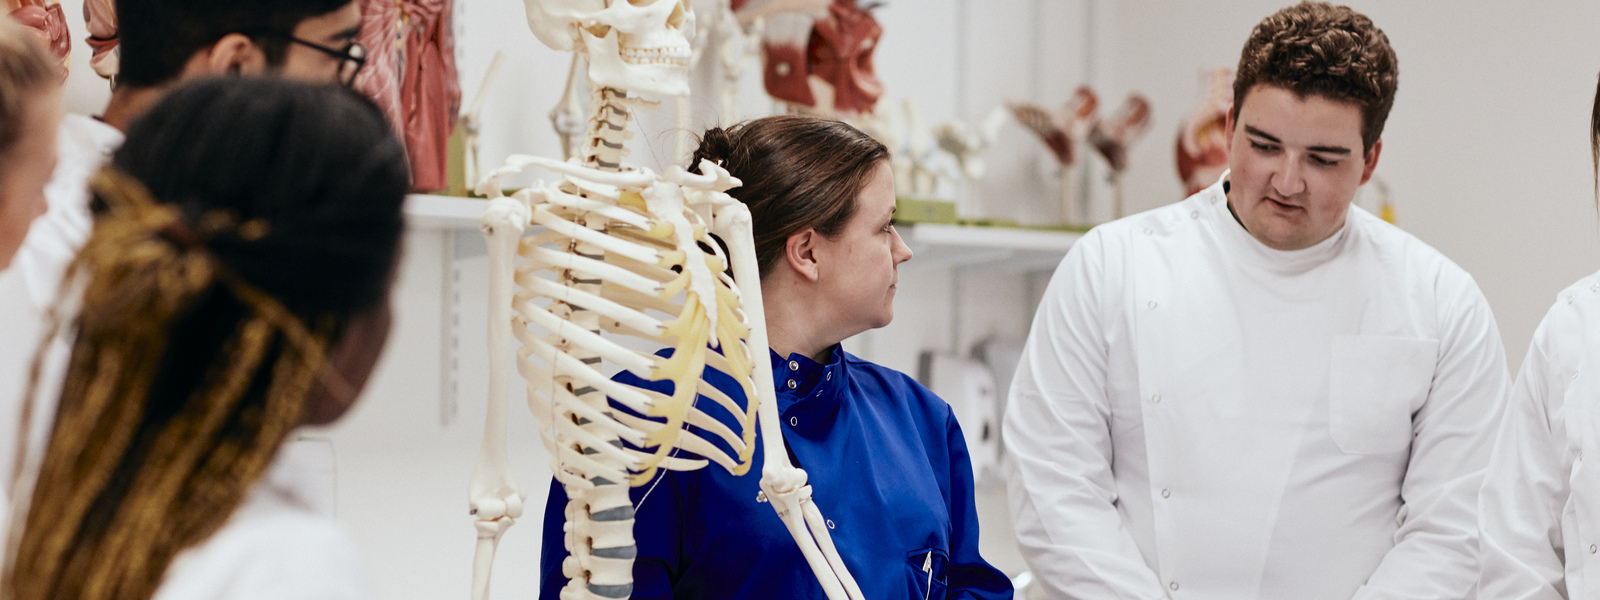 Medical students interacting with a full-size anatomical skeleton.